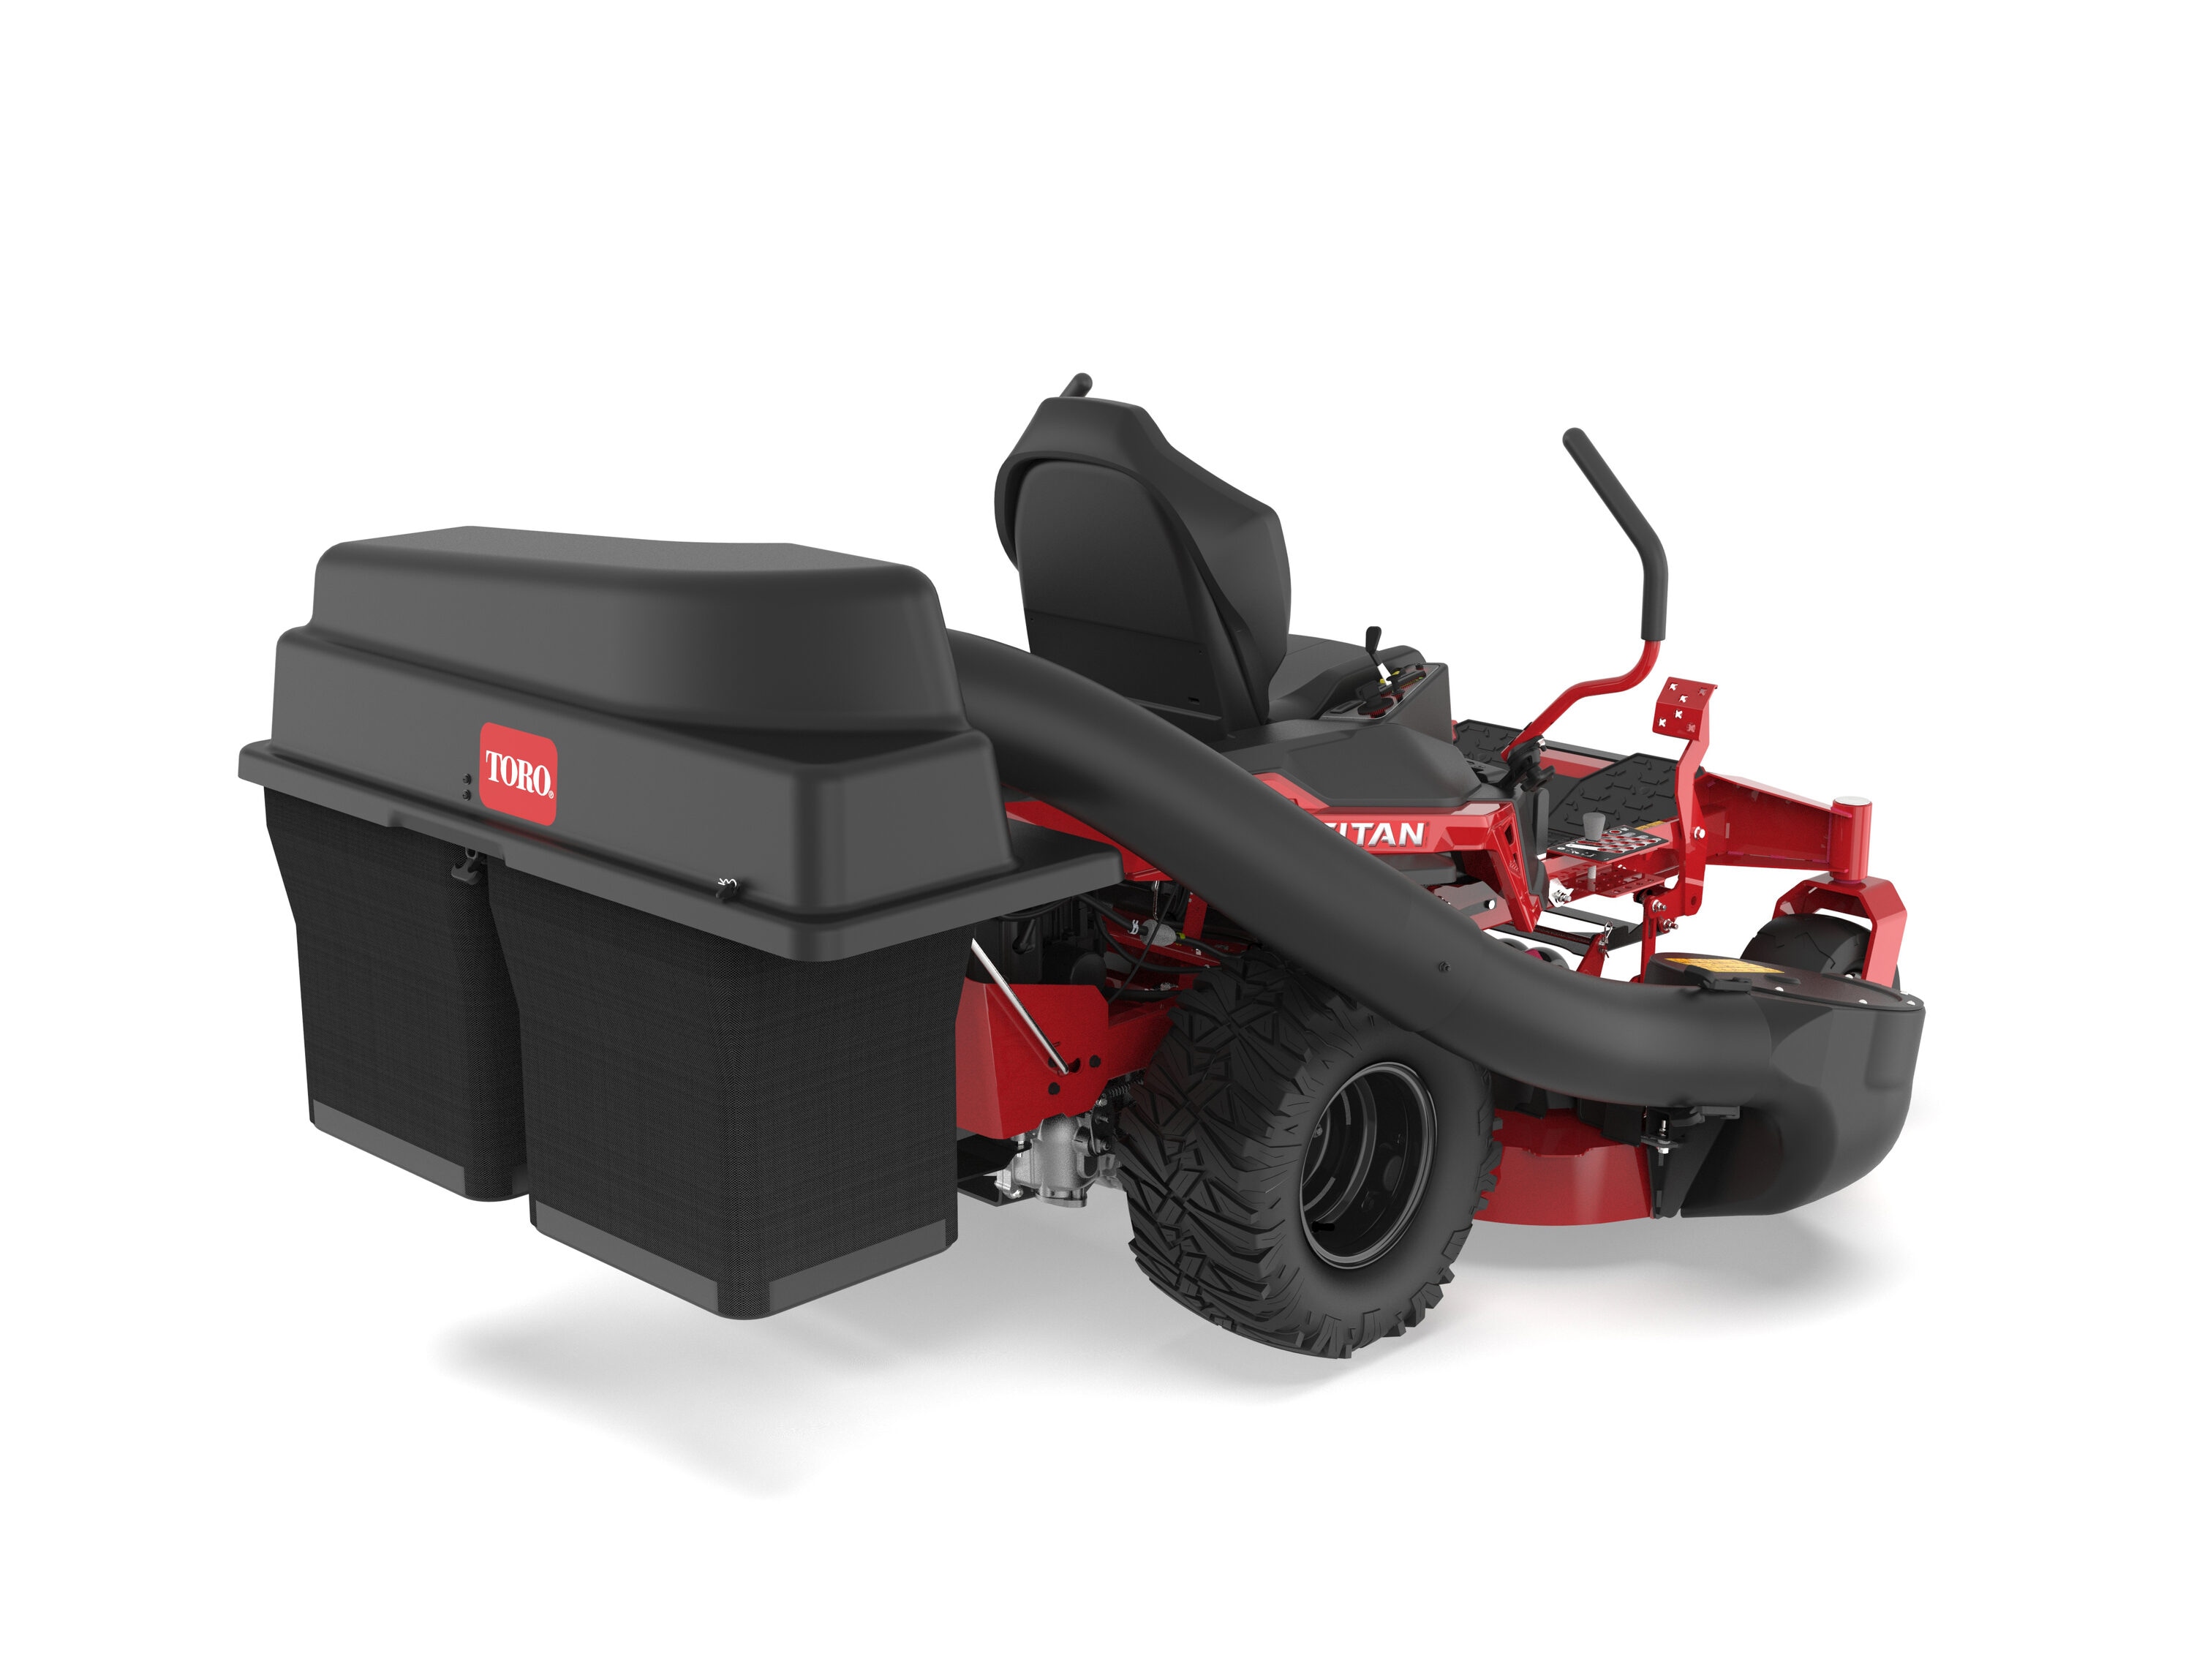 Toro Lawn Mower Parts & Accessories at